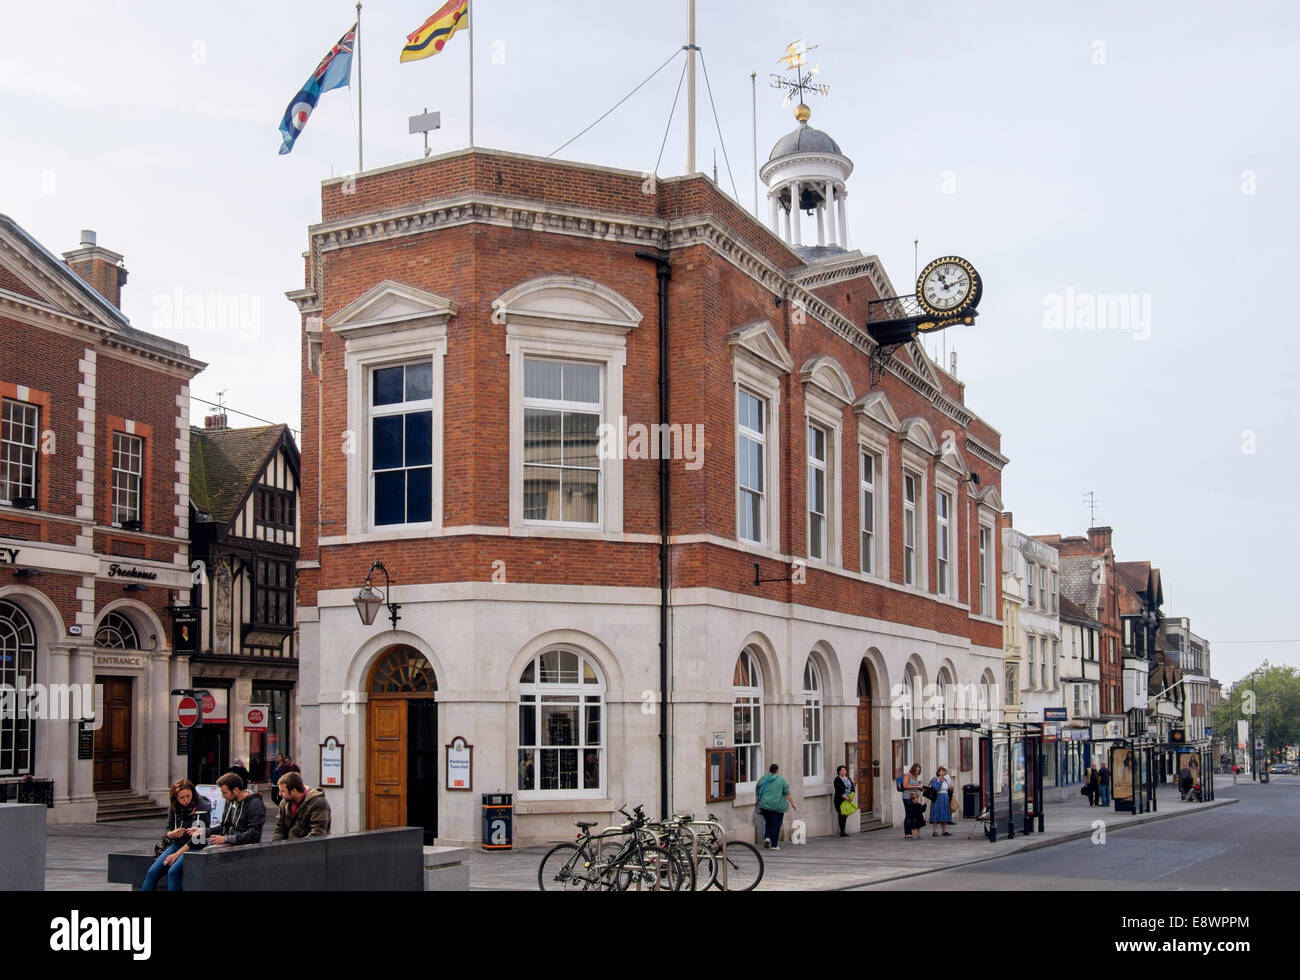 18th century Old Town Hall 1753 Grade II listed building in High Street, Maidstone, Kent, England, UK, Britain. Stock Photo